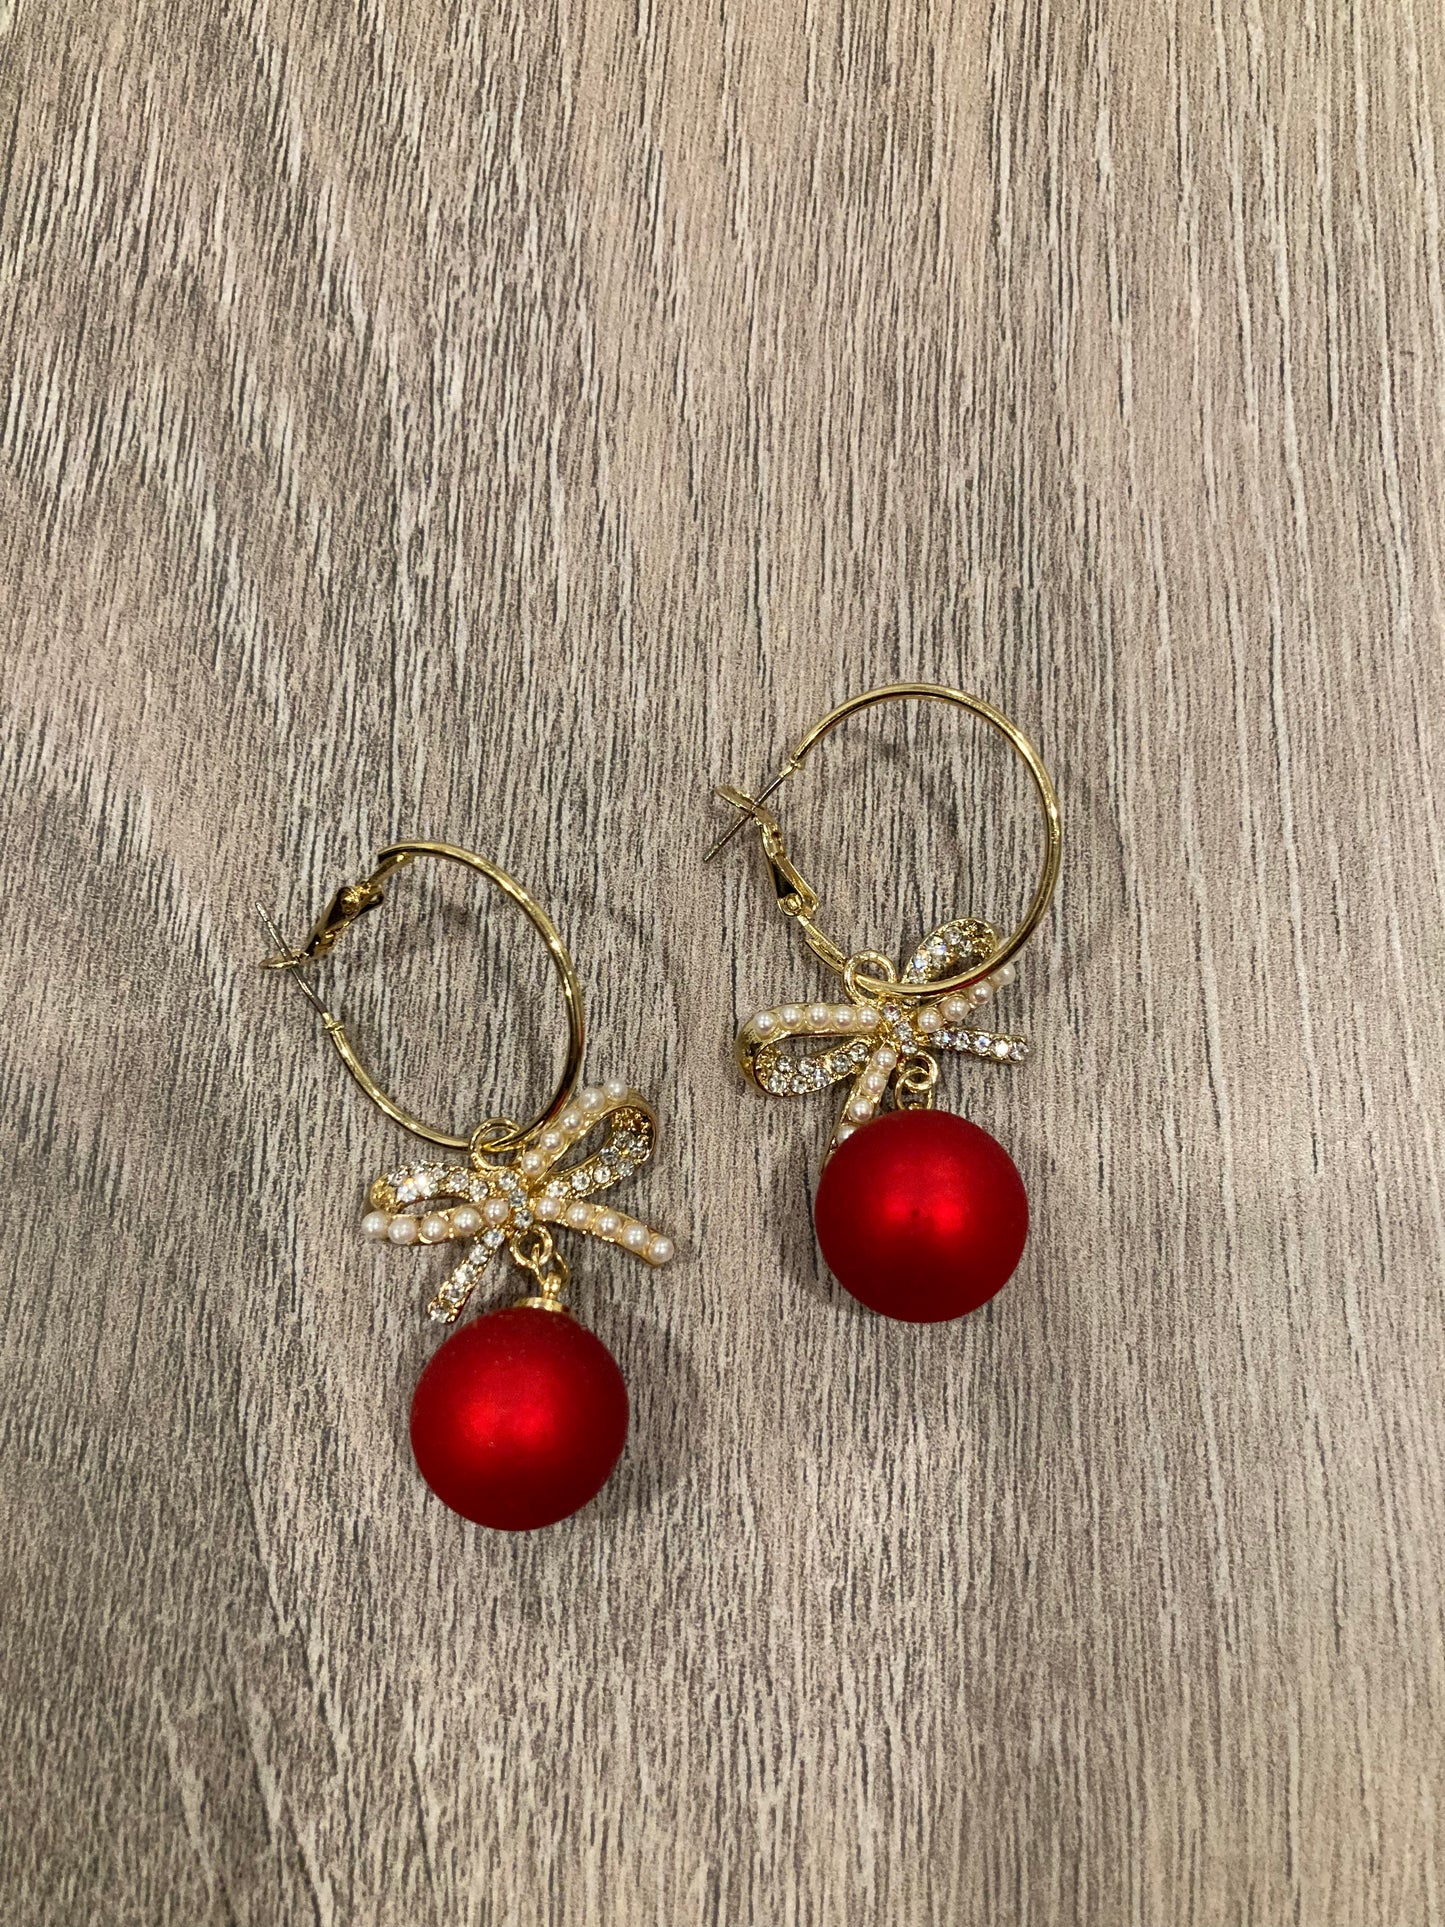 Gold Earrings with Rhinestone Ribbon and Red Ornament Ball